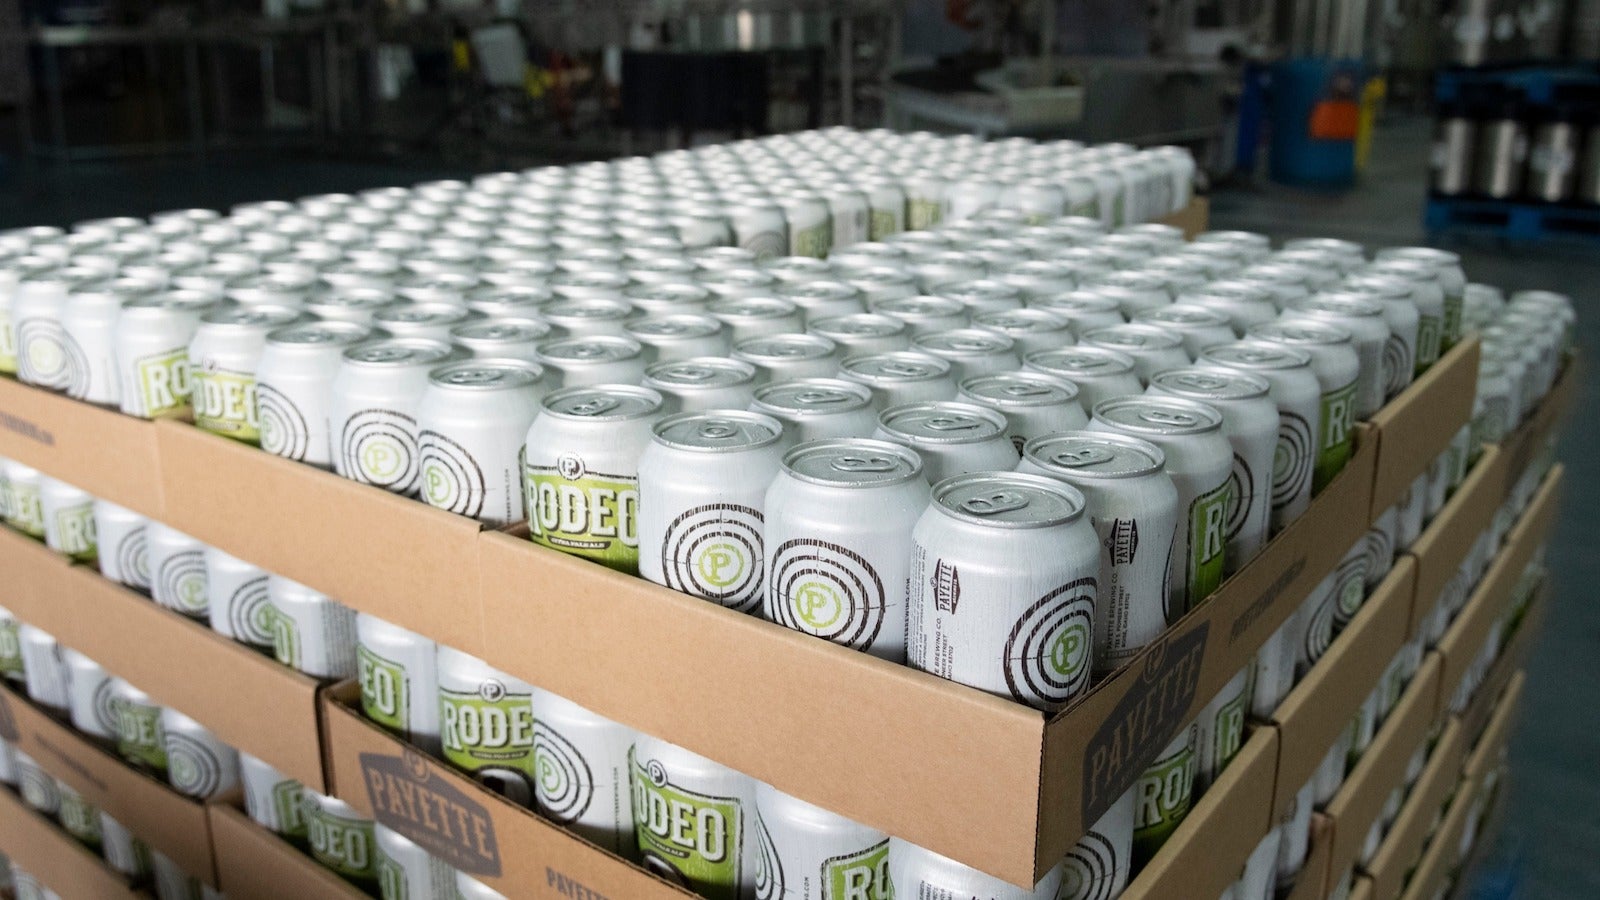 Cases of beer bottled into cans, stacked on a pallet